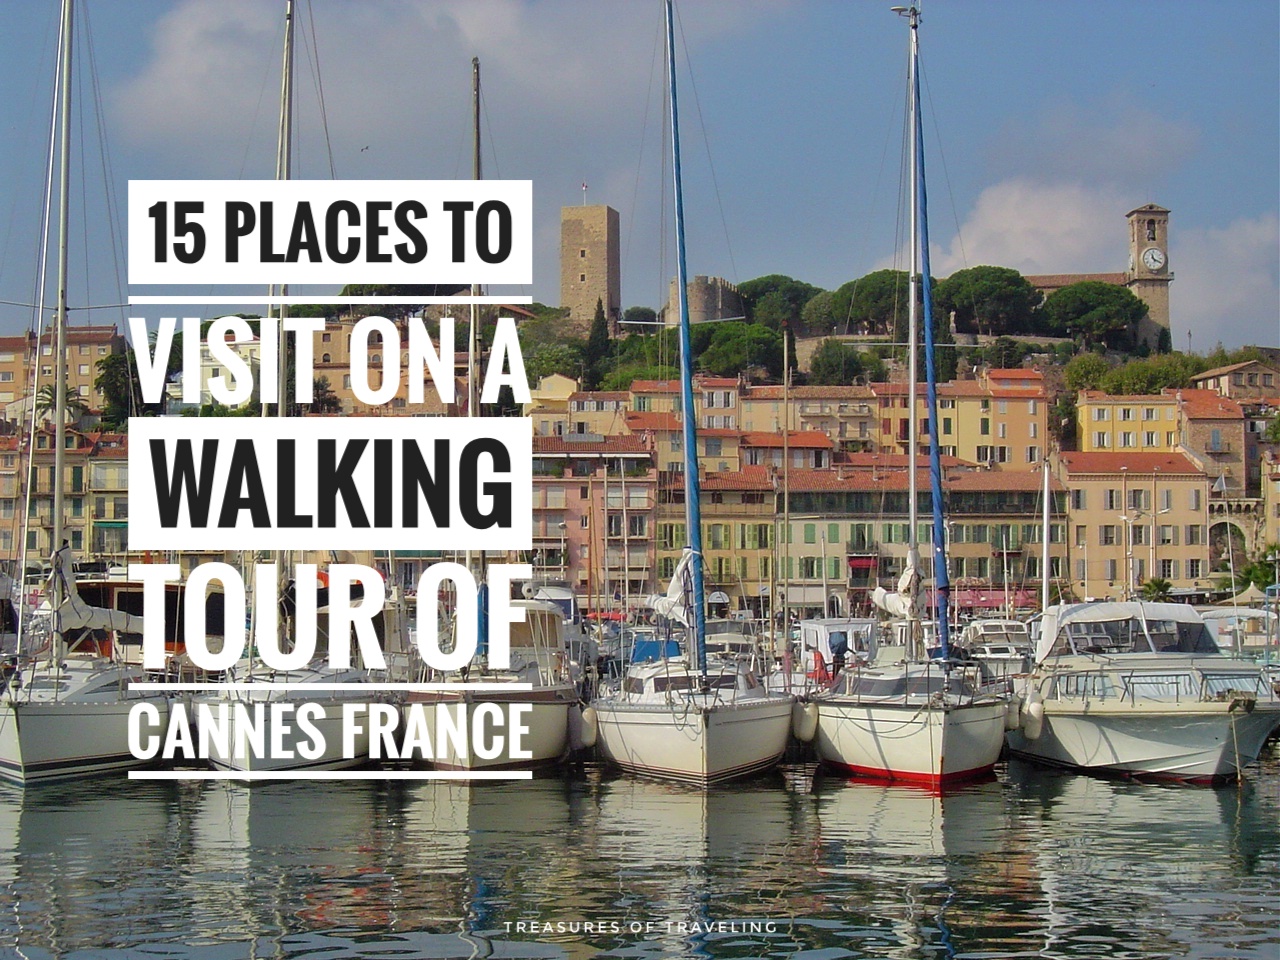 Cannes is a French city along the Mediterranean coast well known for its beautiful sandy beaches and the Cannes Film Festival. Cannes is just one of the many treasures of traveling throughout the French Riviera so check out these 15 places to visit in Cannes.